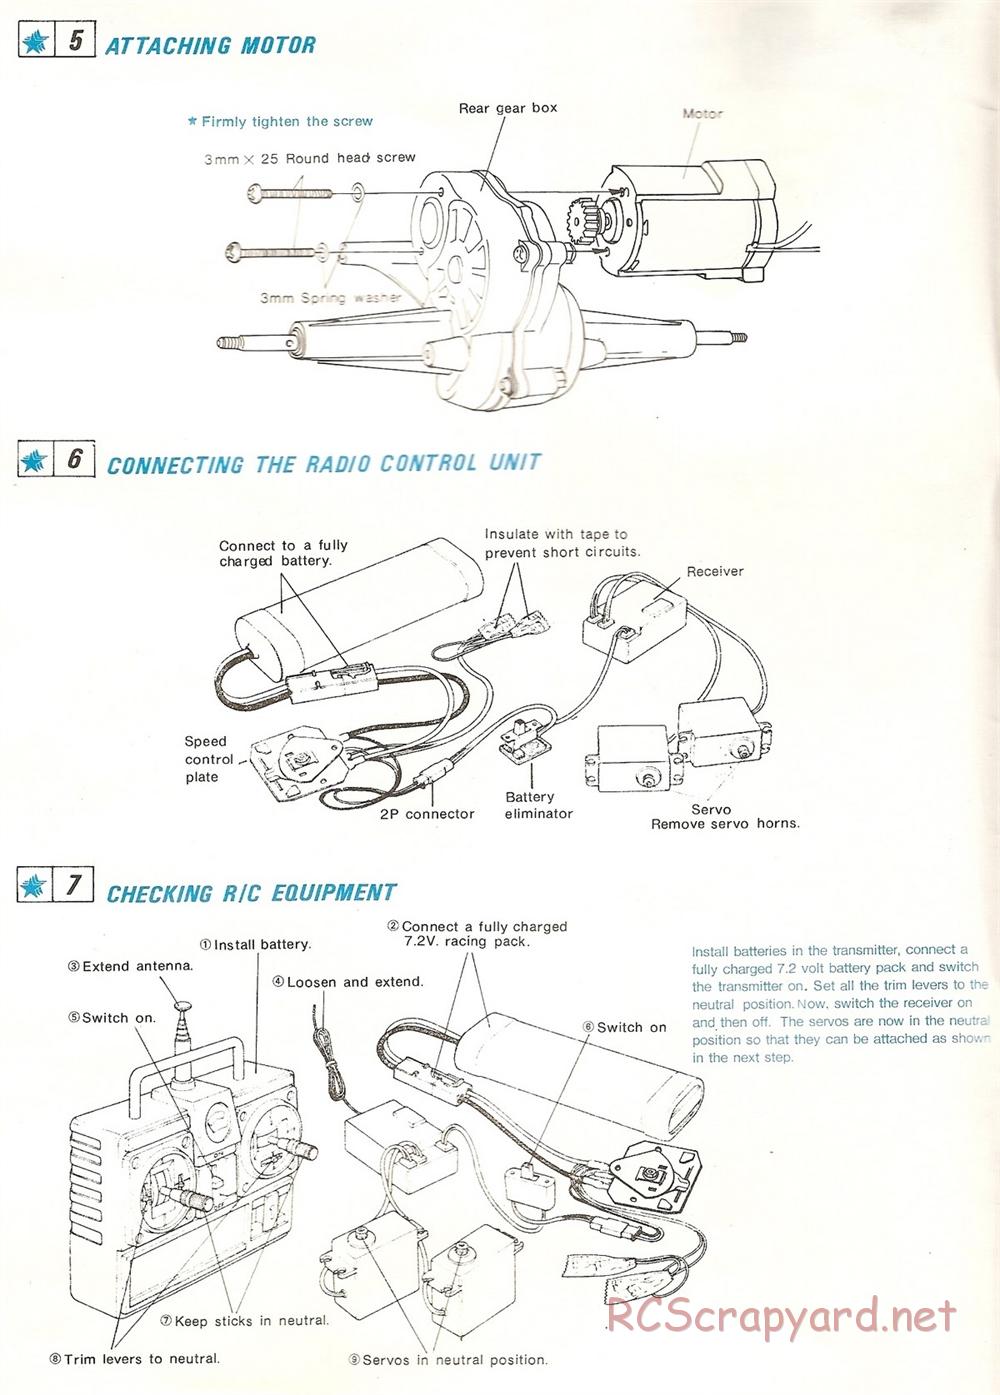 Traxxas - The Cat (1987) - Manual - Page 4